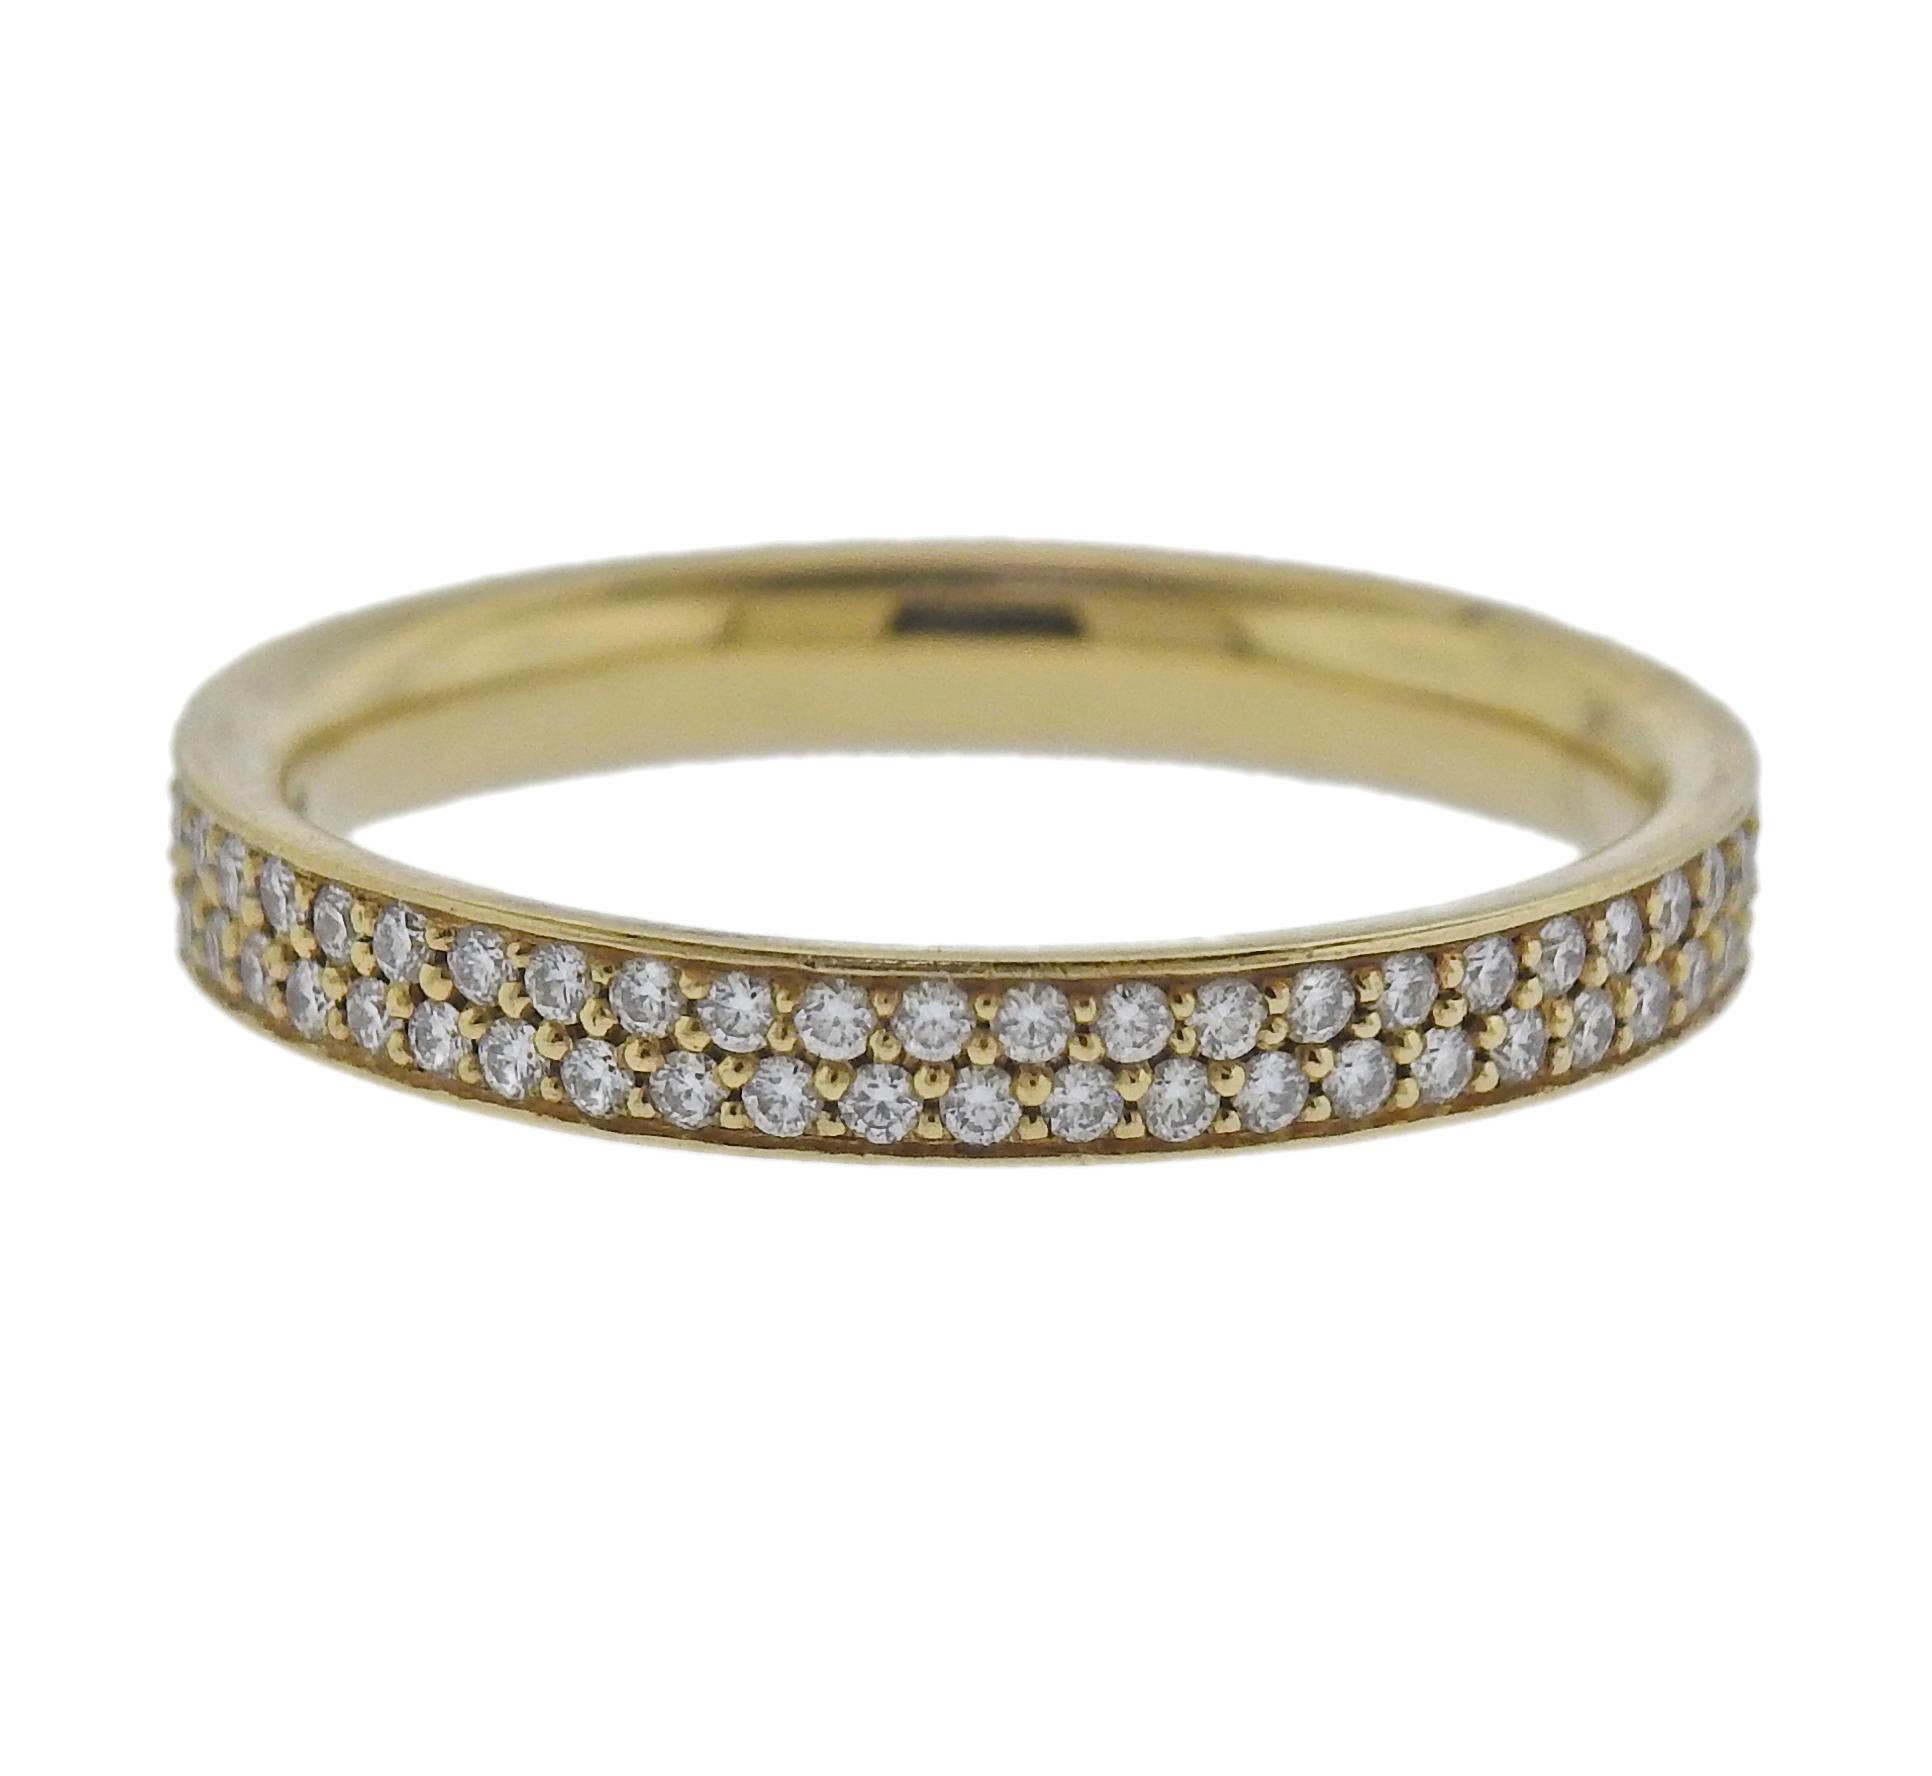 Georg Jensen 18k Yellow Gold Magic Pave Diamond Ring 1513 B In New Condition For Sale In Lambertville, NJ